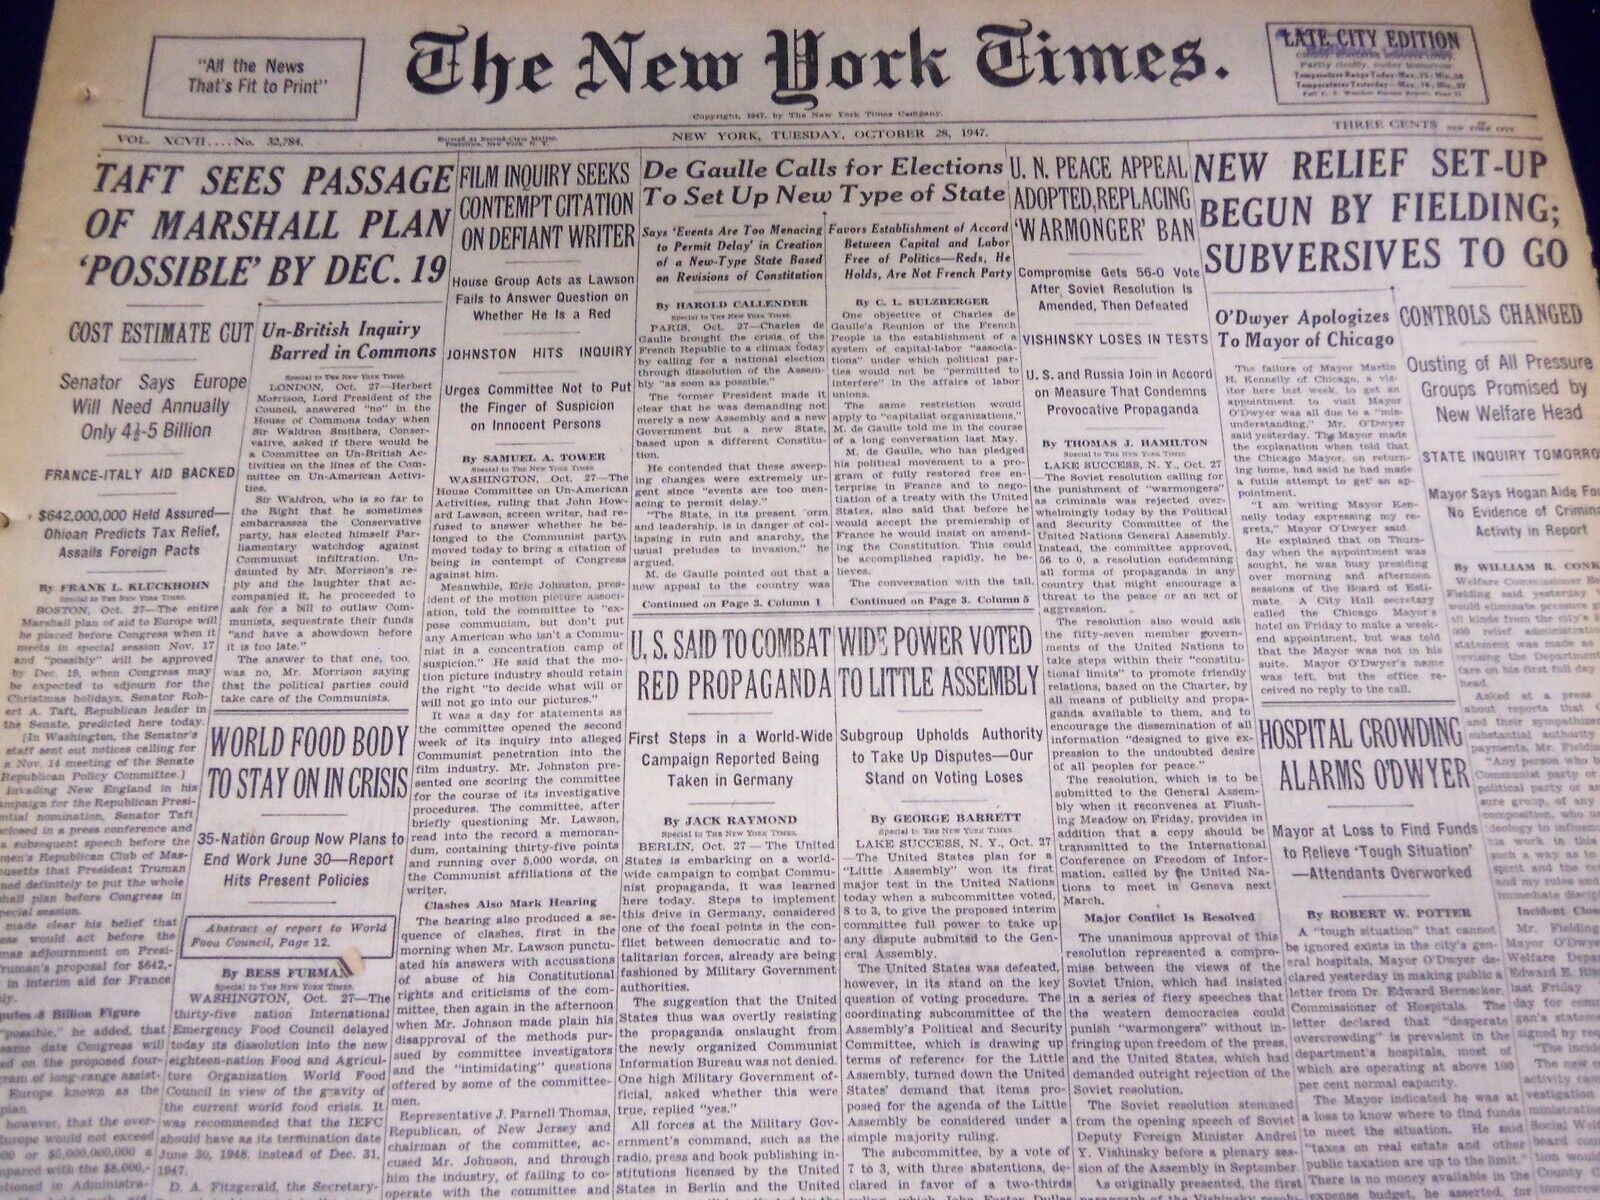 1947 OCTOBER 28 NEW YORK TIMES - SCREEN WRITER LAWSON TO BE CITED - NT 3269